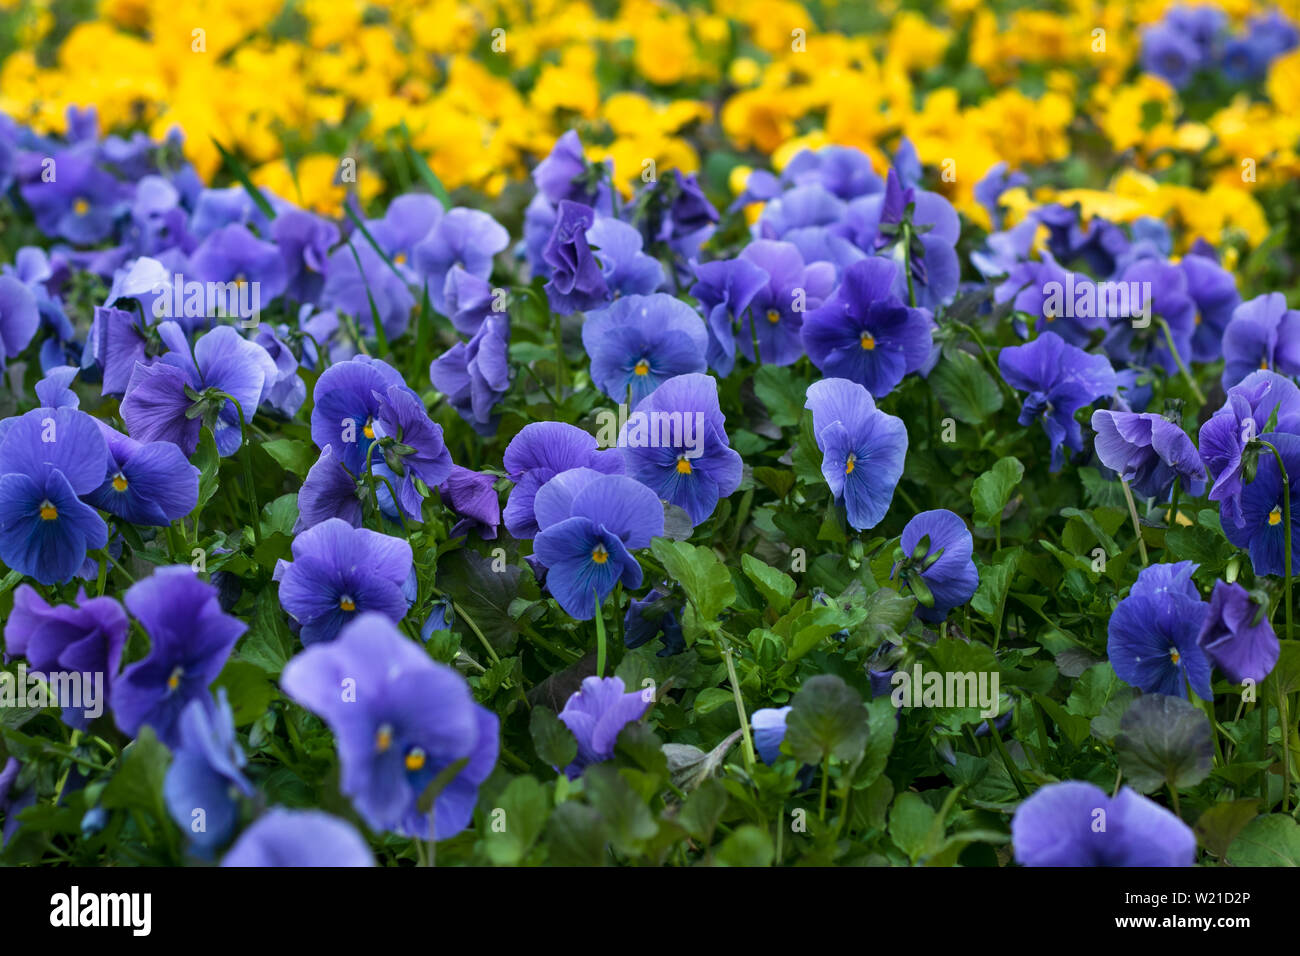 Blue flowers in the garden. Field of violet pansies. Heartsease, pansy background. Floral pattern. Flower season. Wild nature. Purple viola close-up. Stock Photo